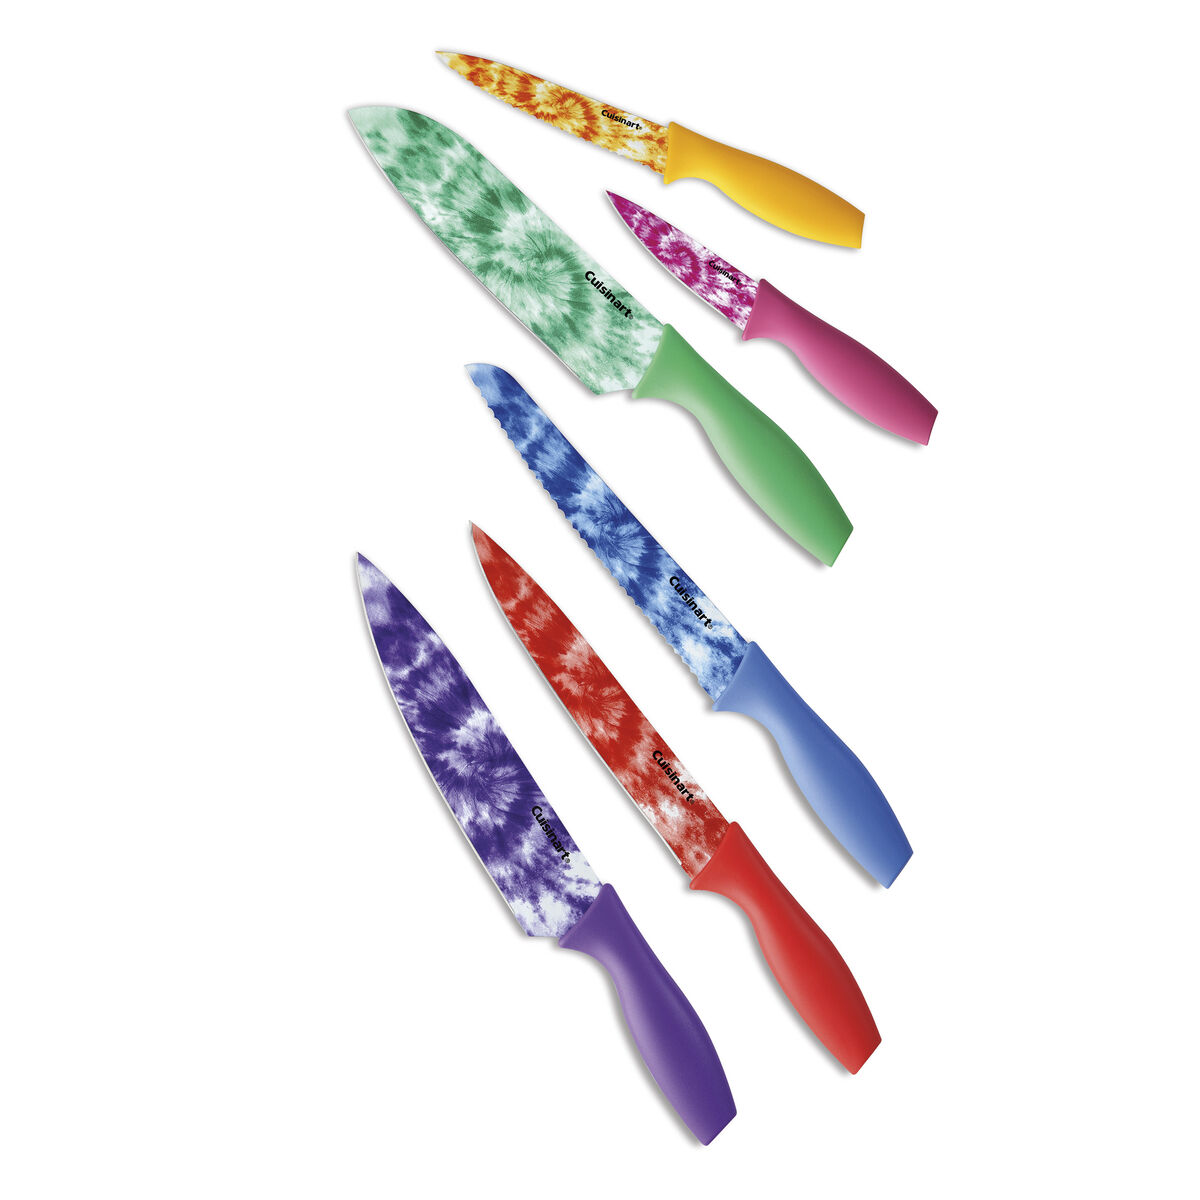 Discontinued 12 Piece Tie Die Color Knife Set with Blade Guards